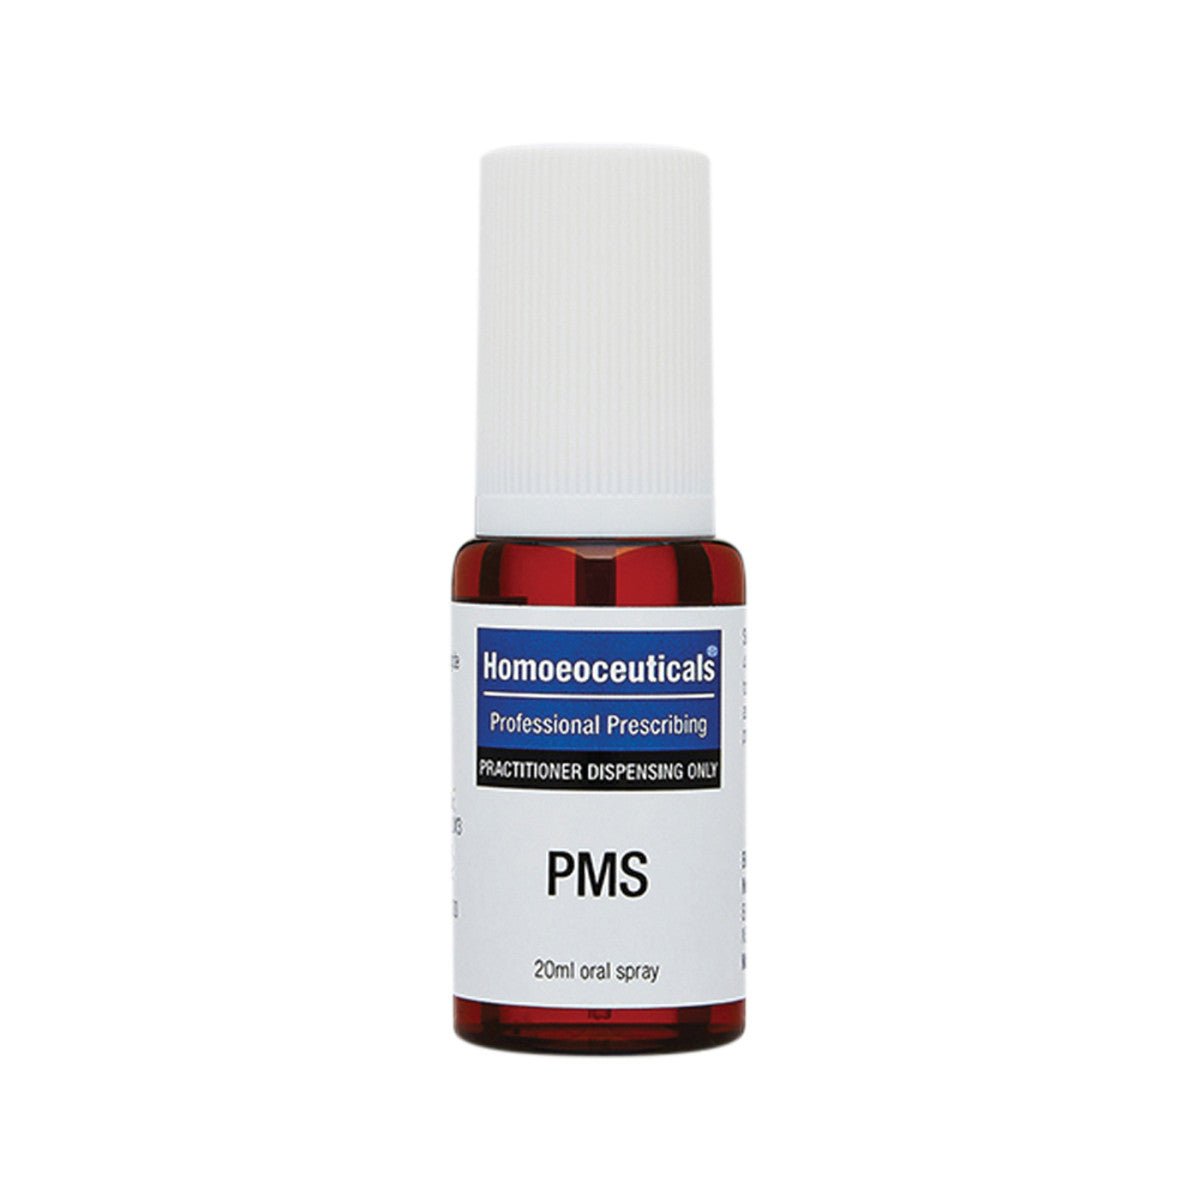 Homoeoceuticals - PMS Spray